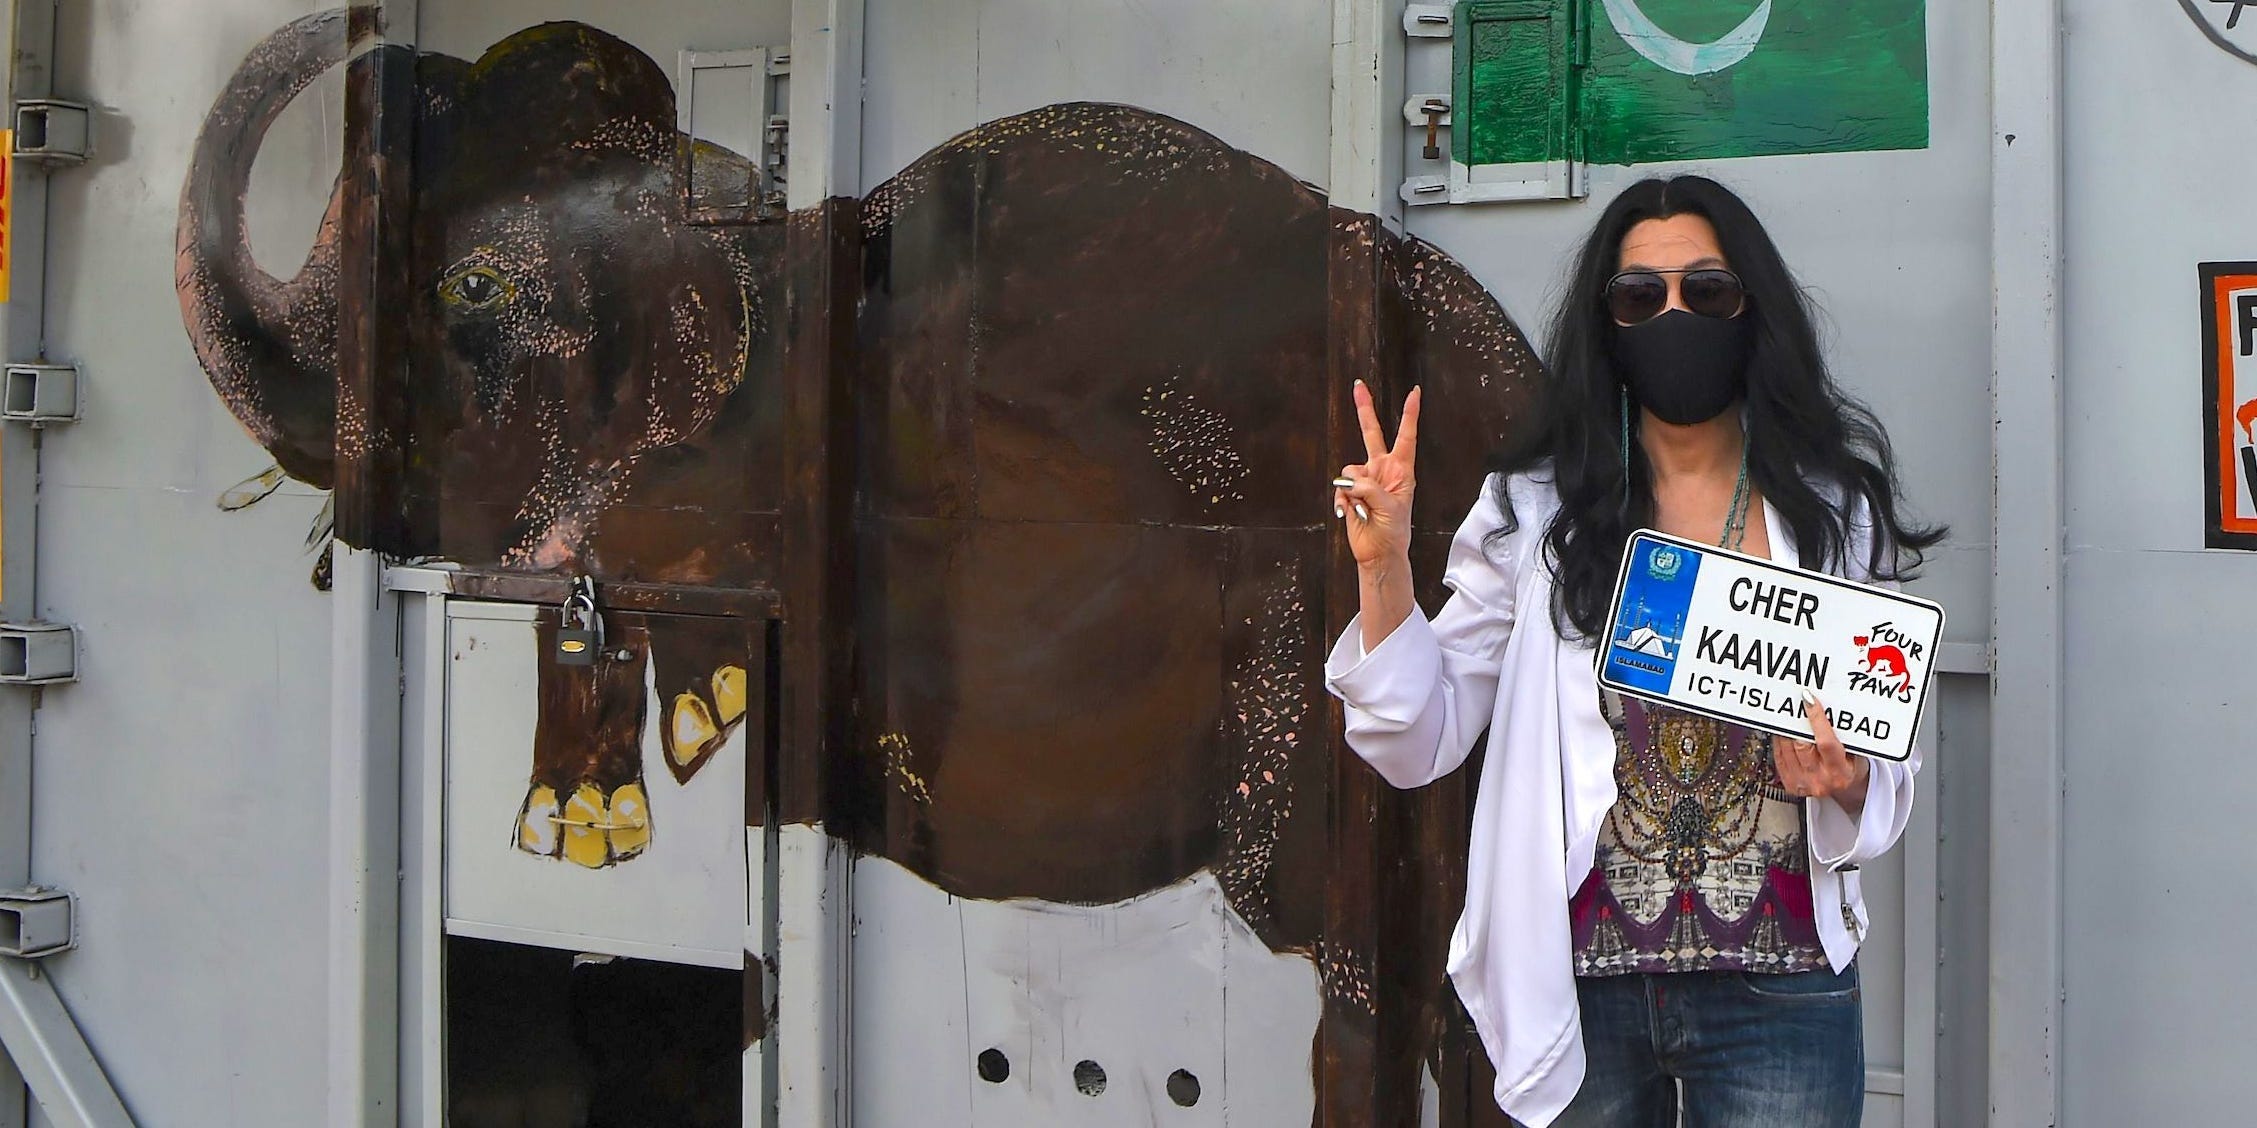 US pop singer Cher poses in front of the crate containing Kaavan the Asian elephant upon his arrival in Cambodia from Pakistan at Siem Reap International Airport in Siem Reap on November 30, 2020.